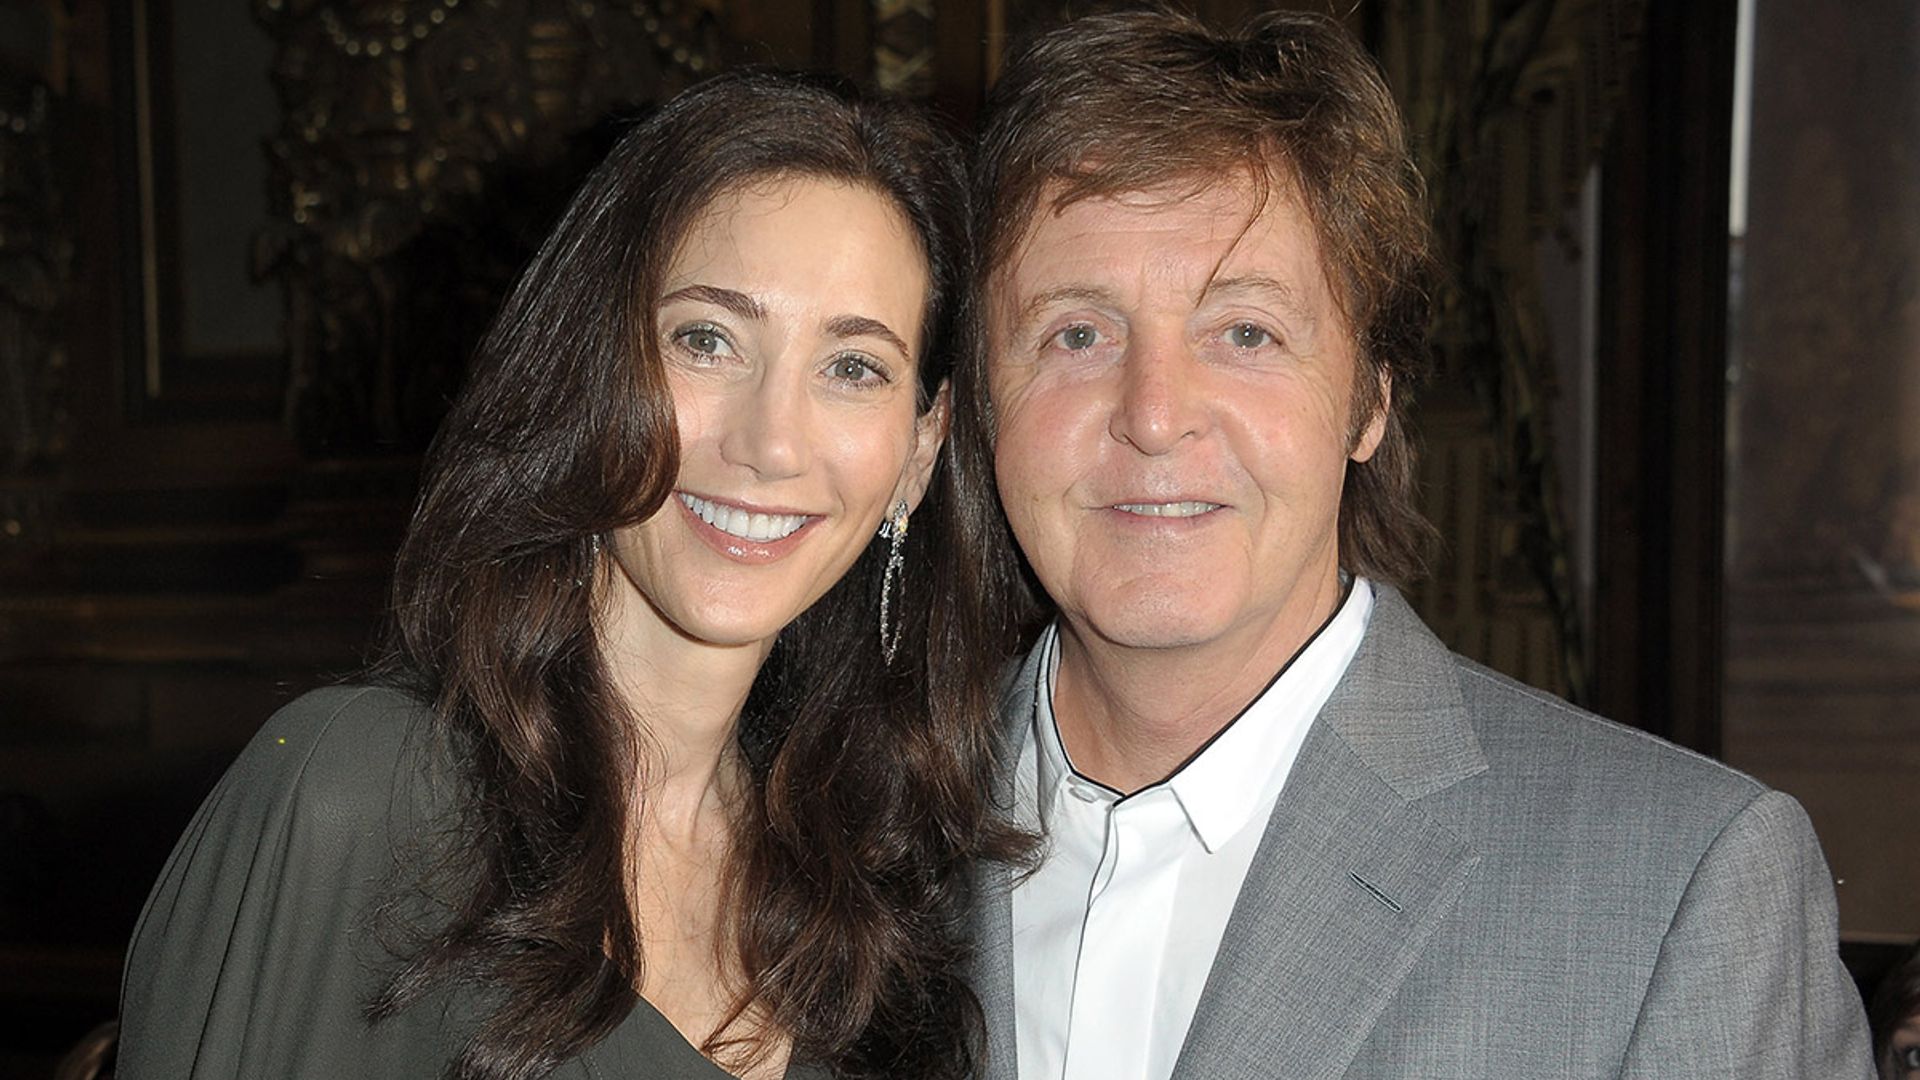 Paul McCartney shares insight into wife Linda's photography as new